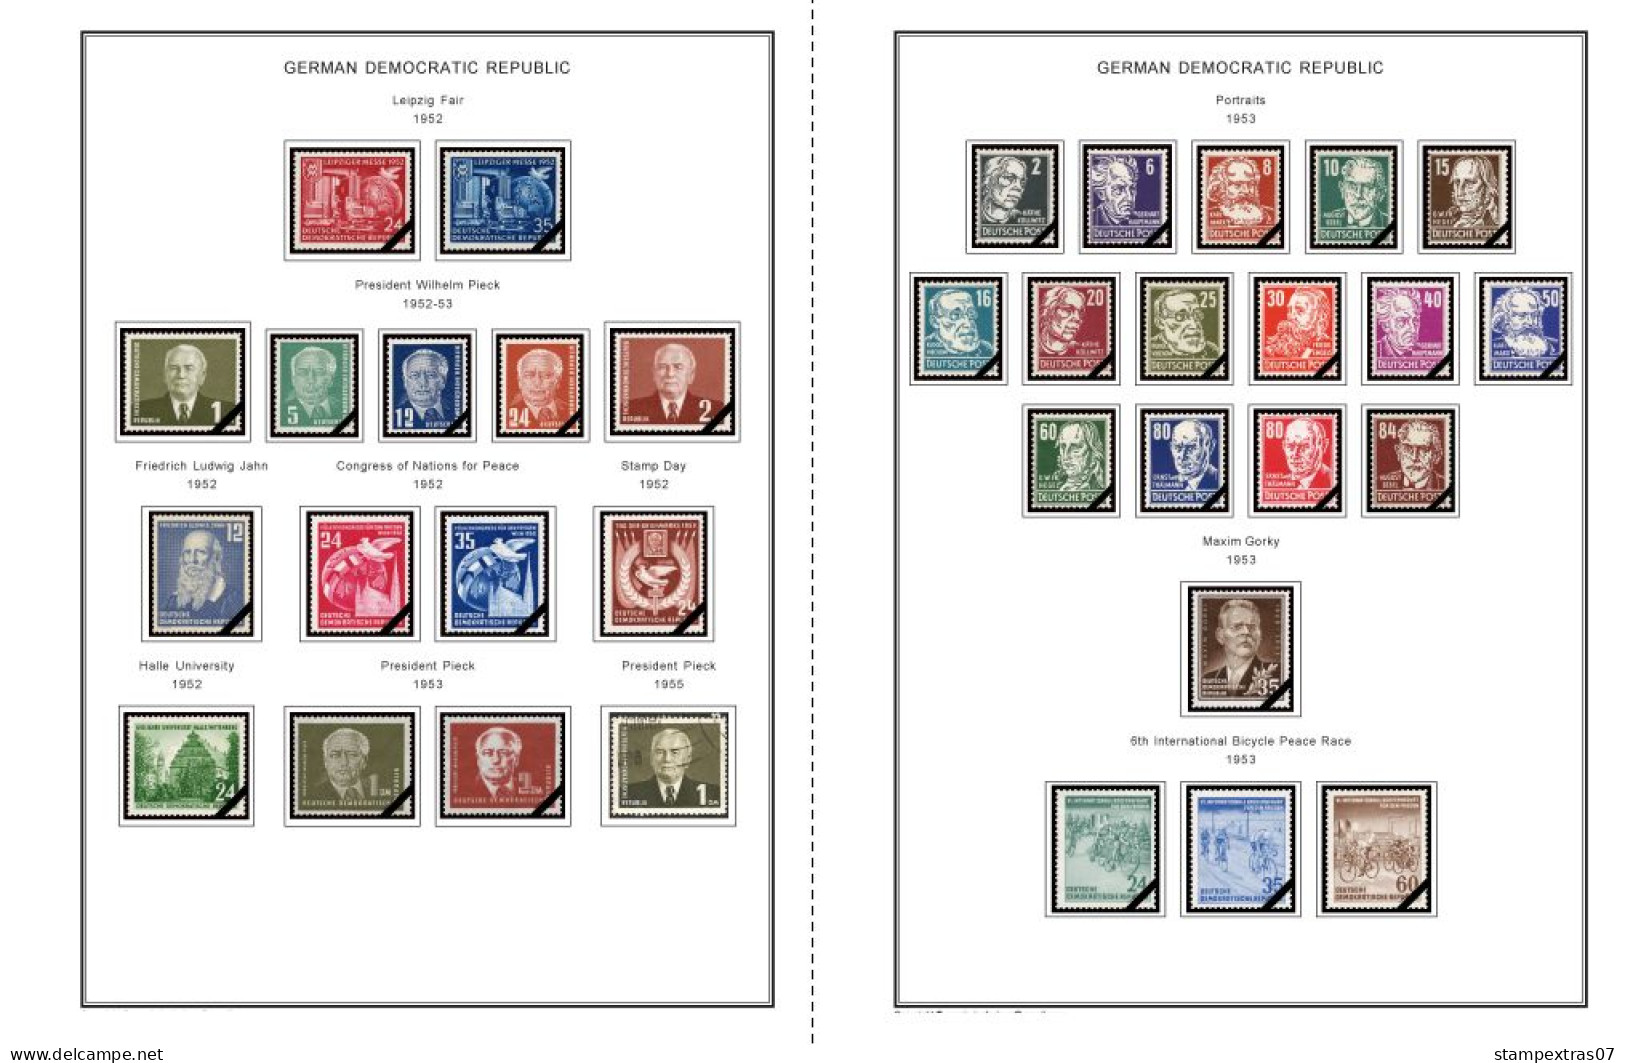 GERMANY (EAST - DDR) STAMP ALBUM PAGES 1949-1990 (334 Color Illustrated Pages) - Anglais